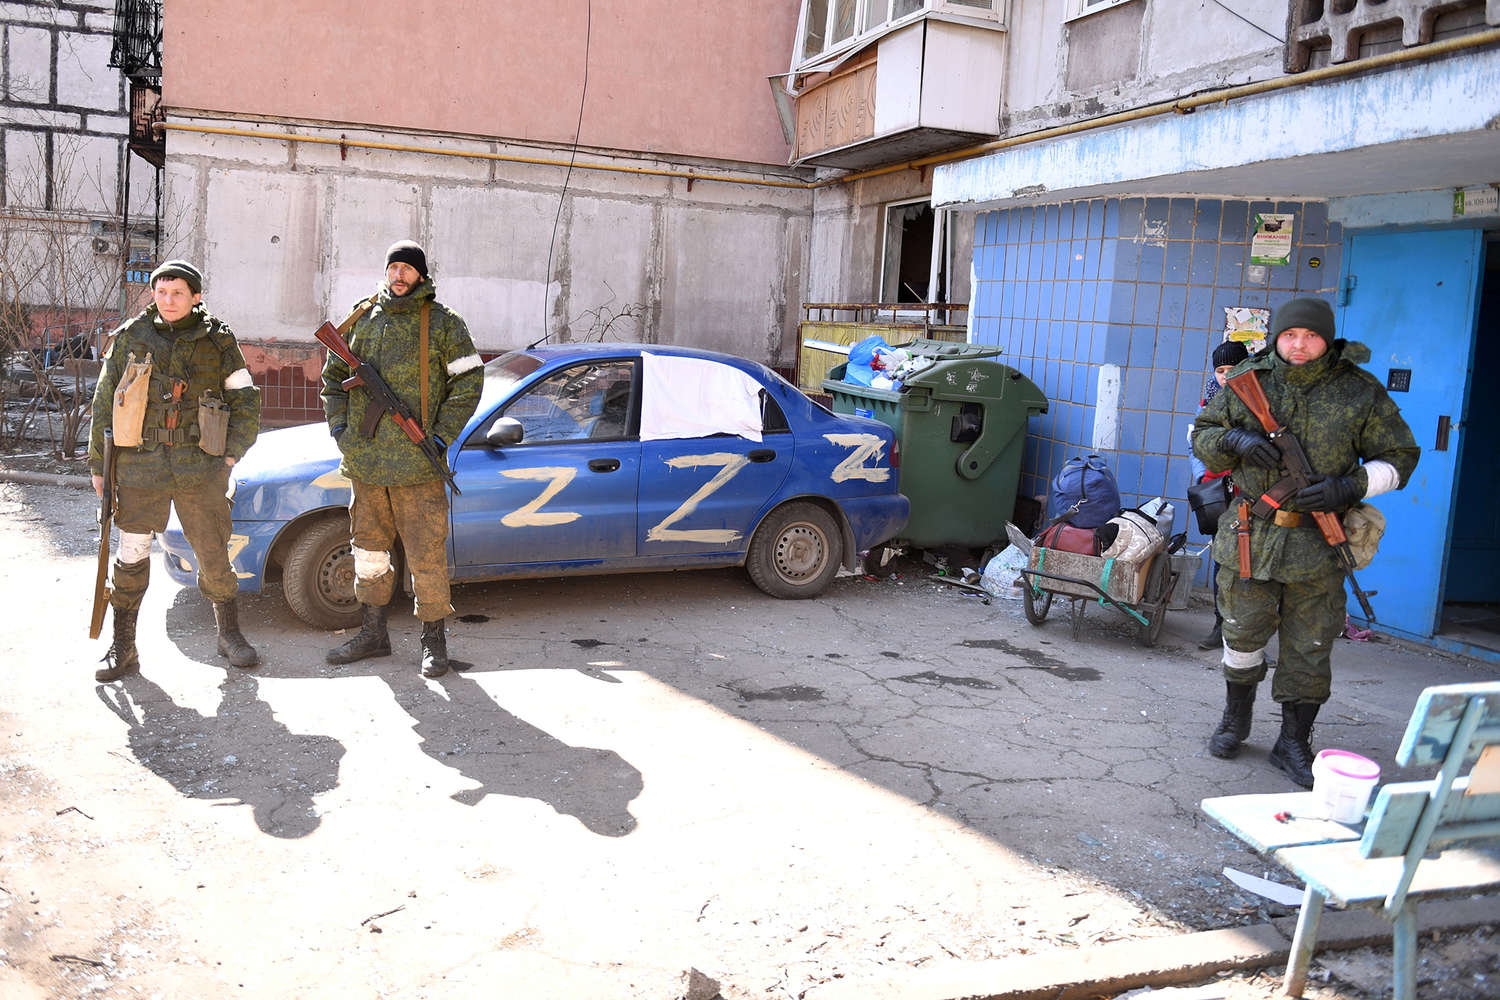 DPR servicemen in the courtyard of a residential building on the outskirts of Mariupol, March 2022